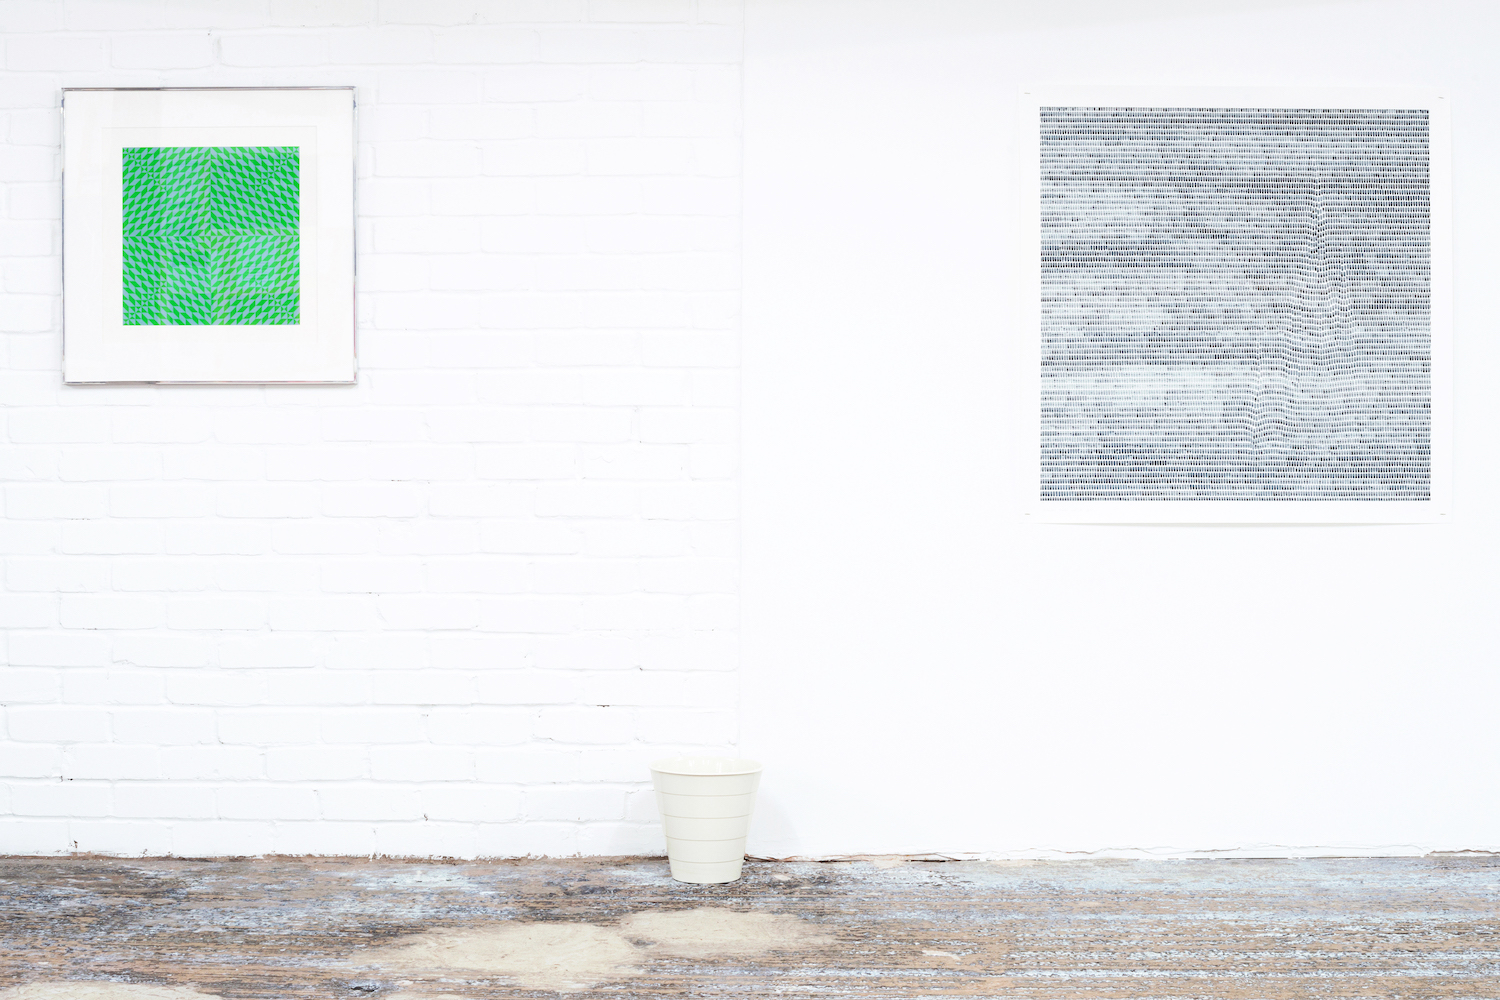 Two works hanging on a white gallery wall. They are both geometric in design, green on the left and grey on the right. Below them is a plastic white wastepaper bin.